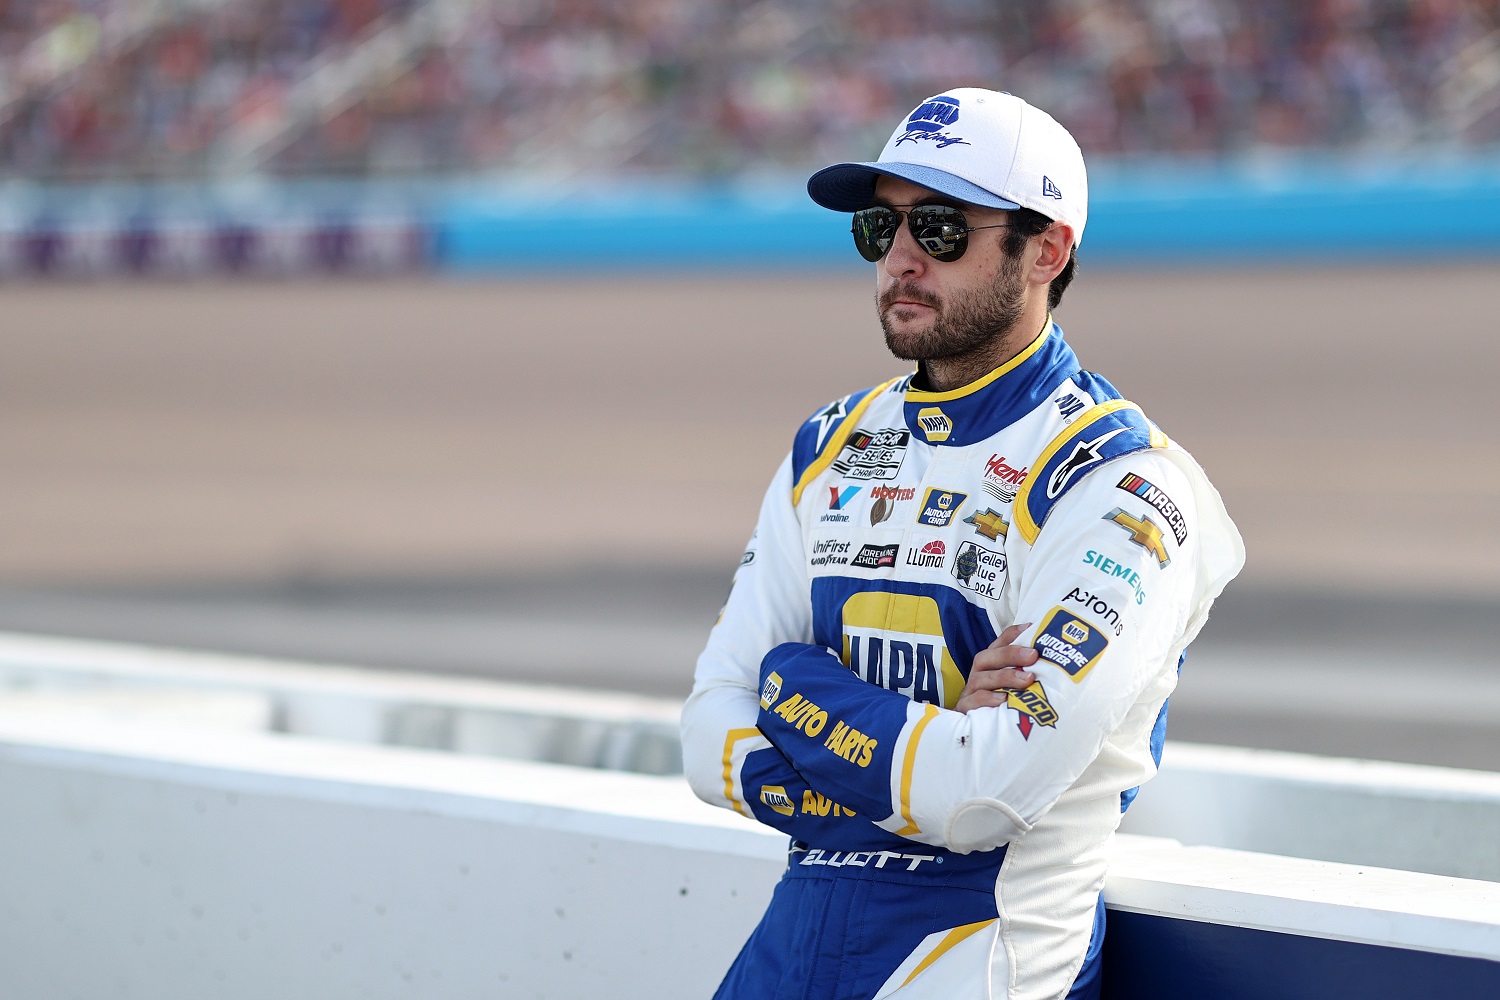 Chase Elliott, driver of the No. 9 Chevrolet, waits on the grid prior to the NASCAR Cup Series Championship at Phoenix Raceway on Nov. 7, 2021, in Avondale, Arizona.